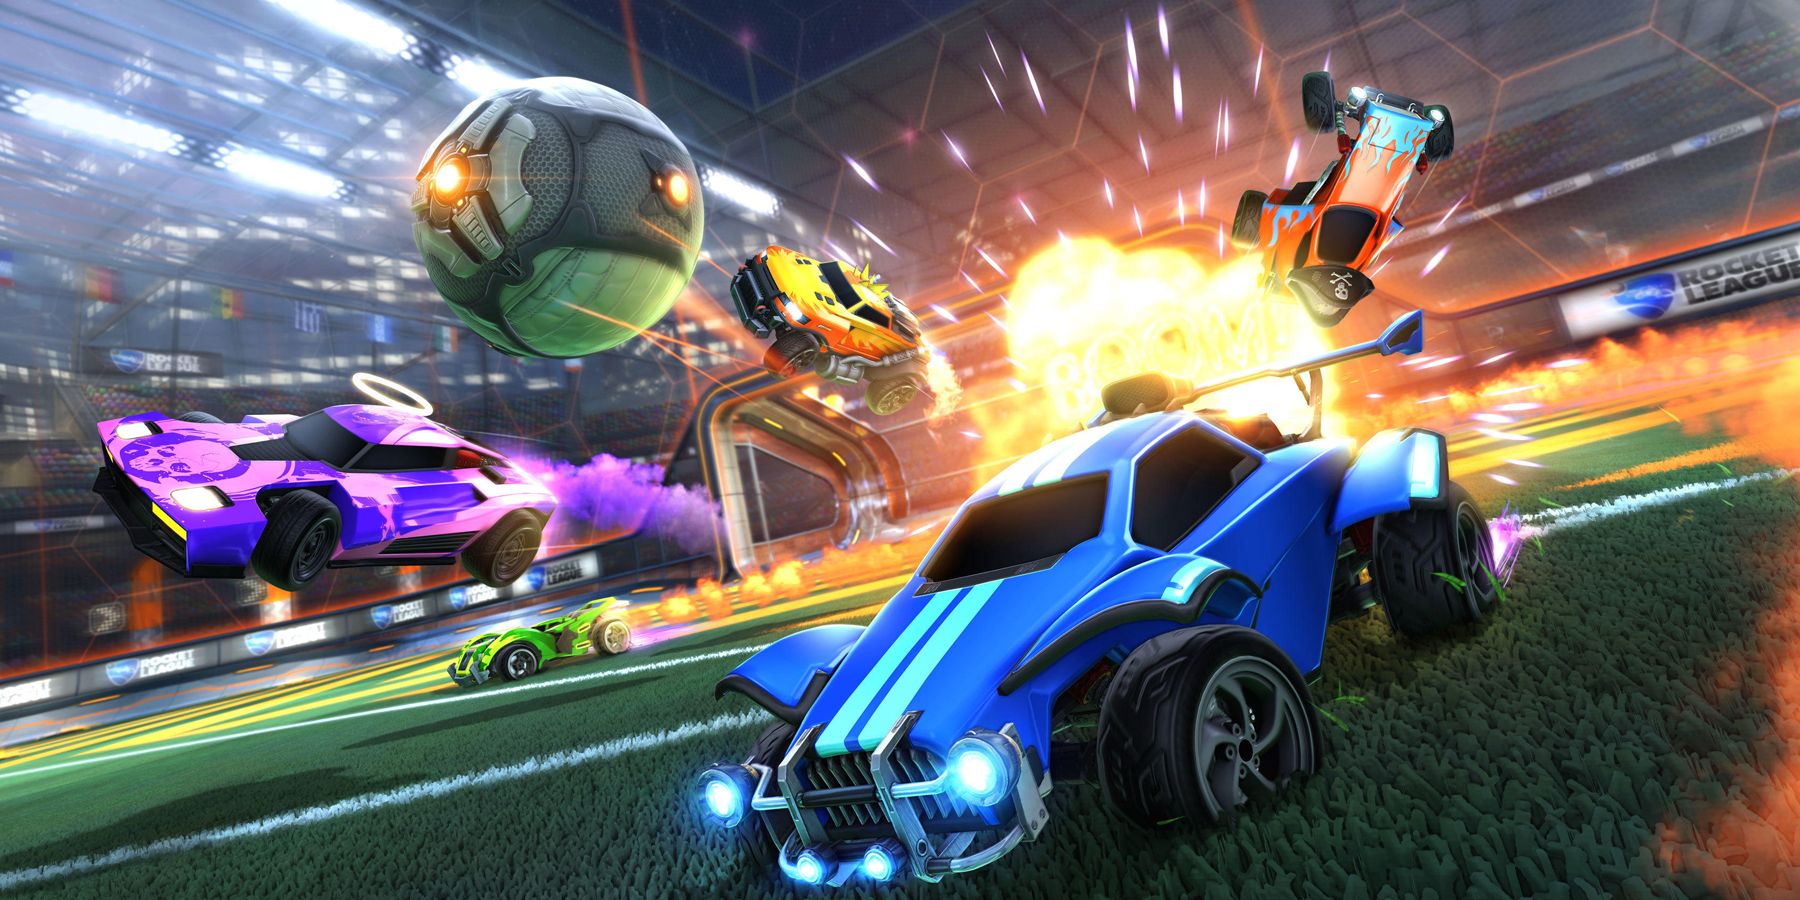 A bunch of cars in action during a Rocket League match